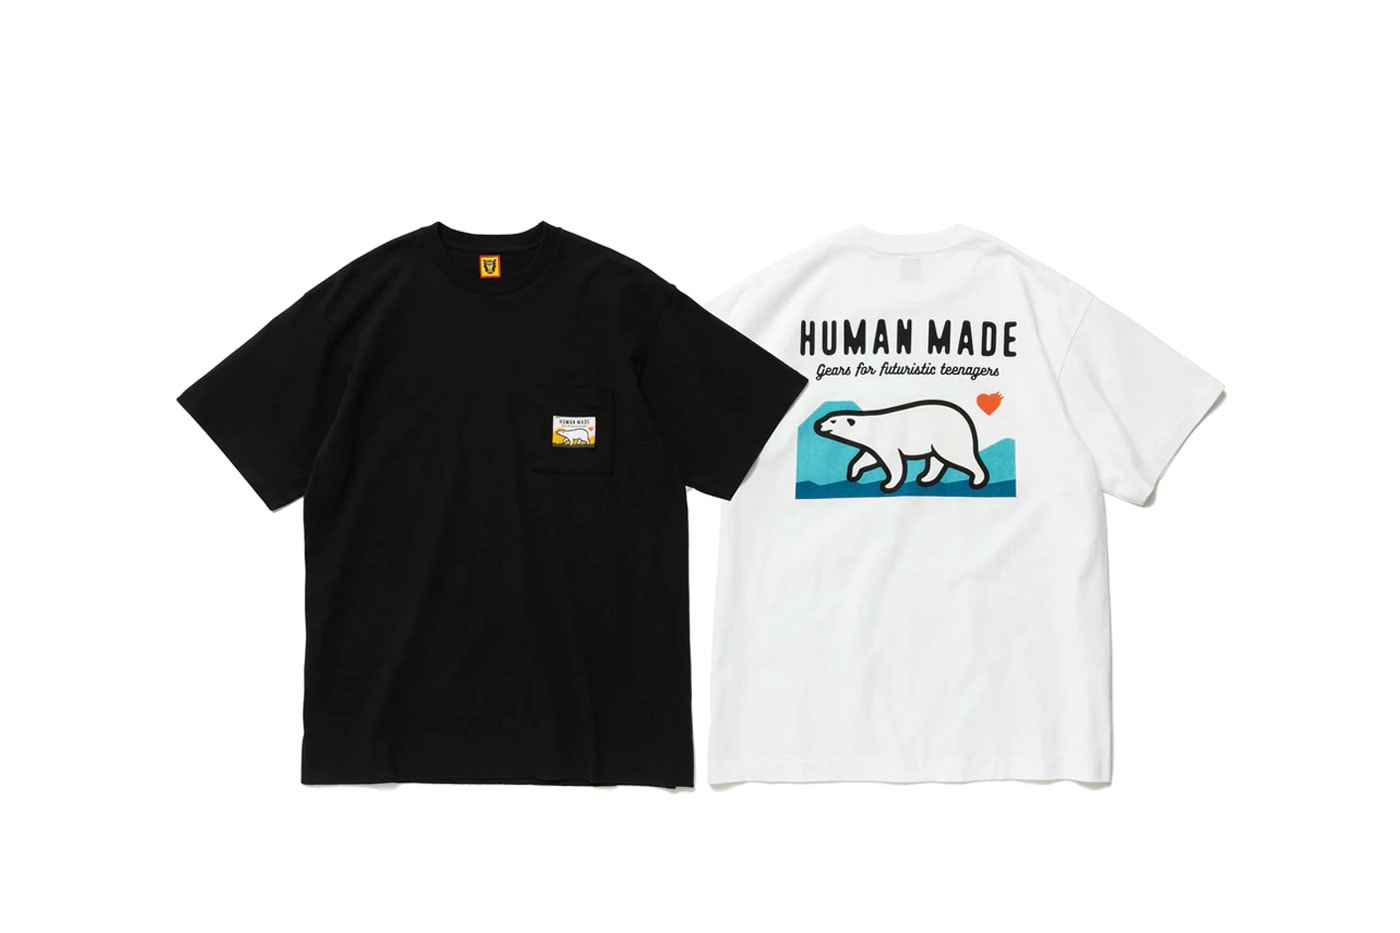 Human Made Summer Camp capsule collection june 11 shirts shorts t shirts caps hats bags towel blanket camper tin release info date price